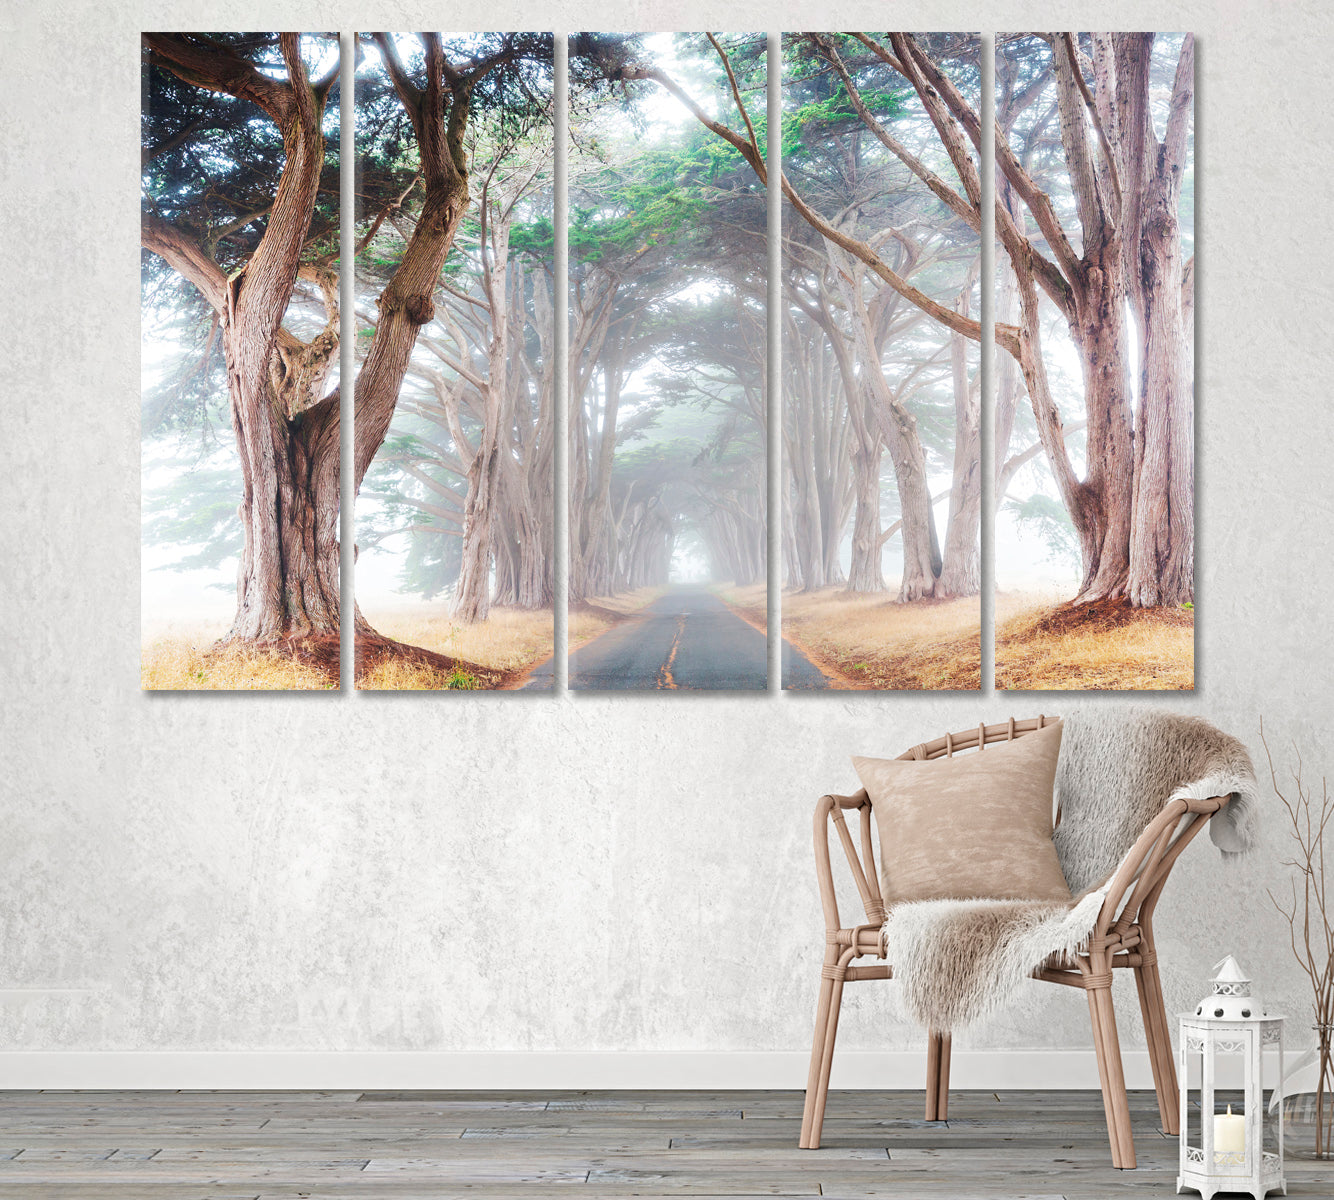 Misty Tree Tunnel Canvas Print ArtLexy 5 Panels 36"x24" inches 